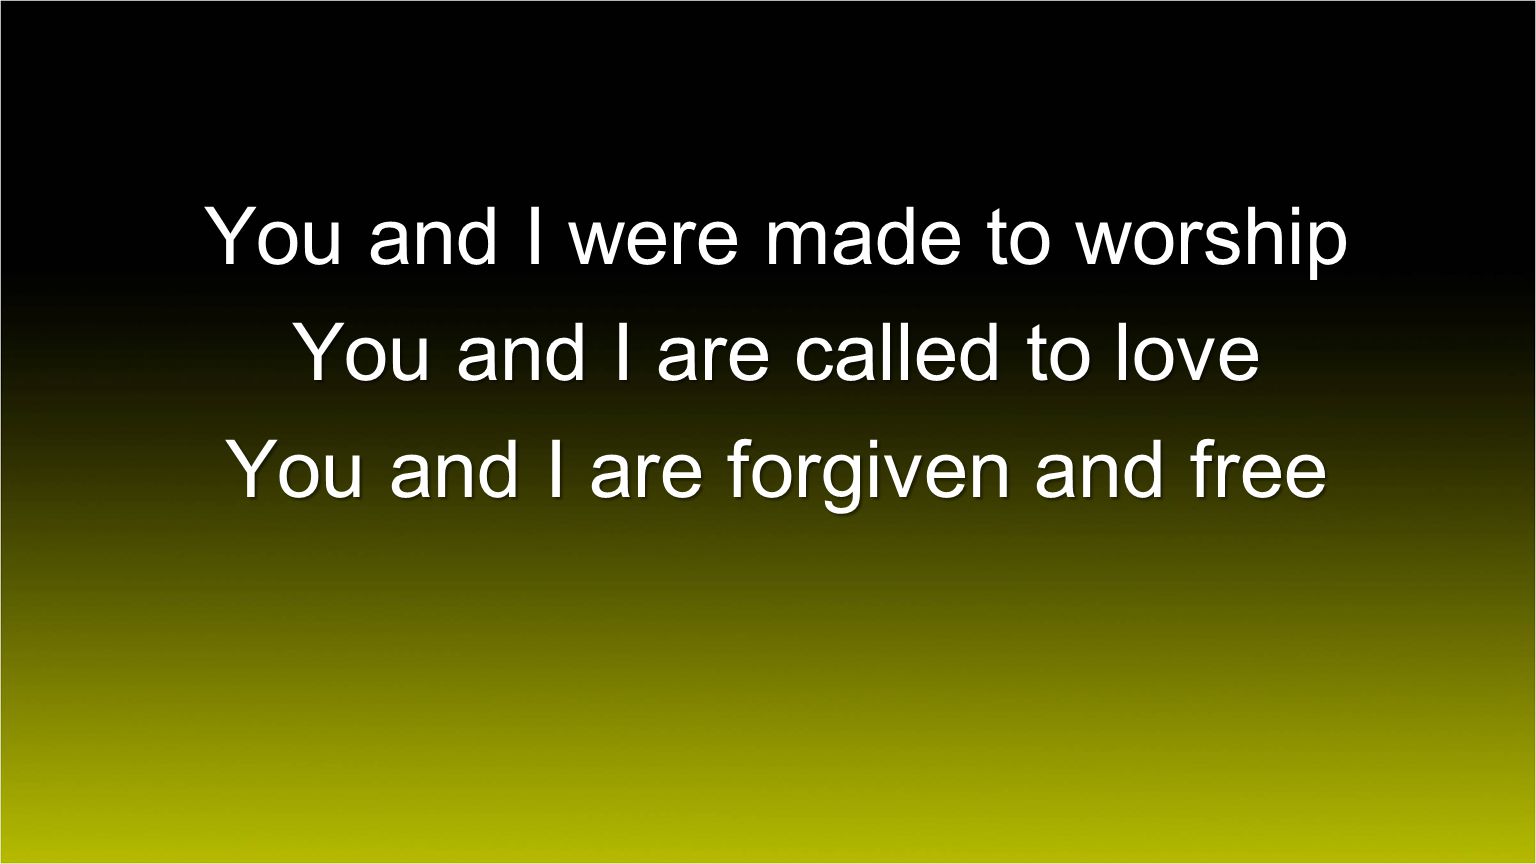 You and I were made to worship You and I are called to love